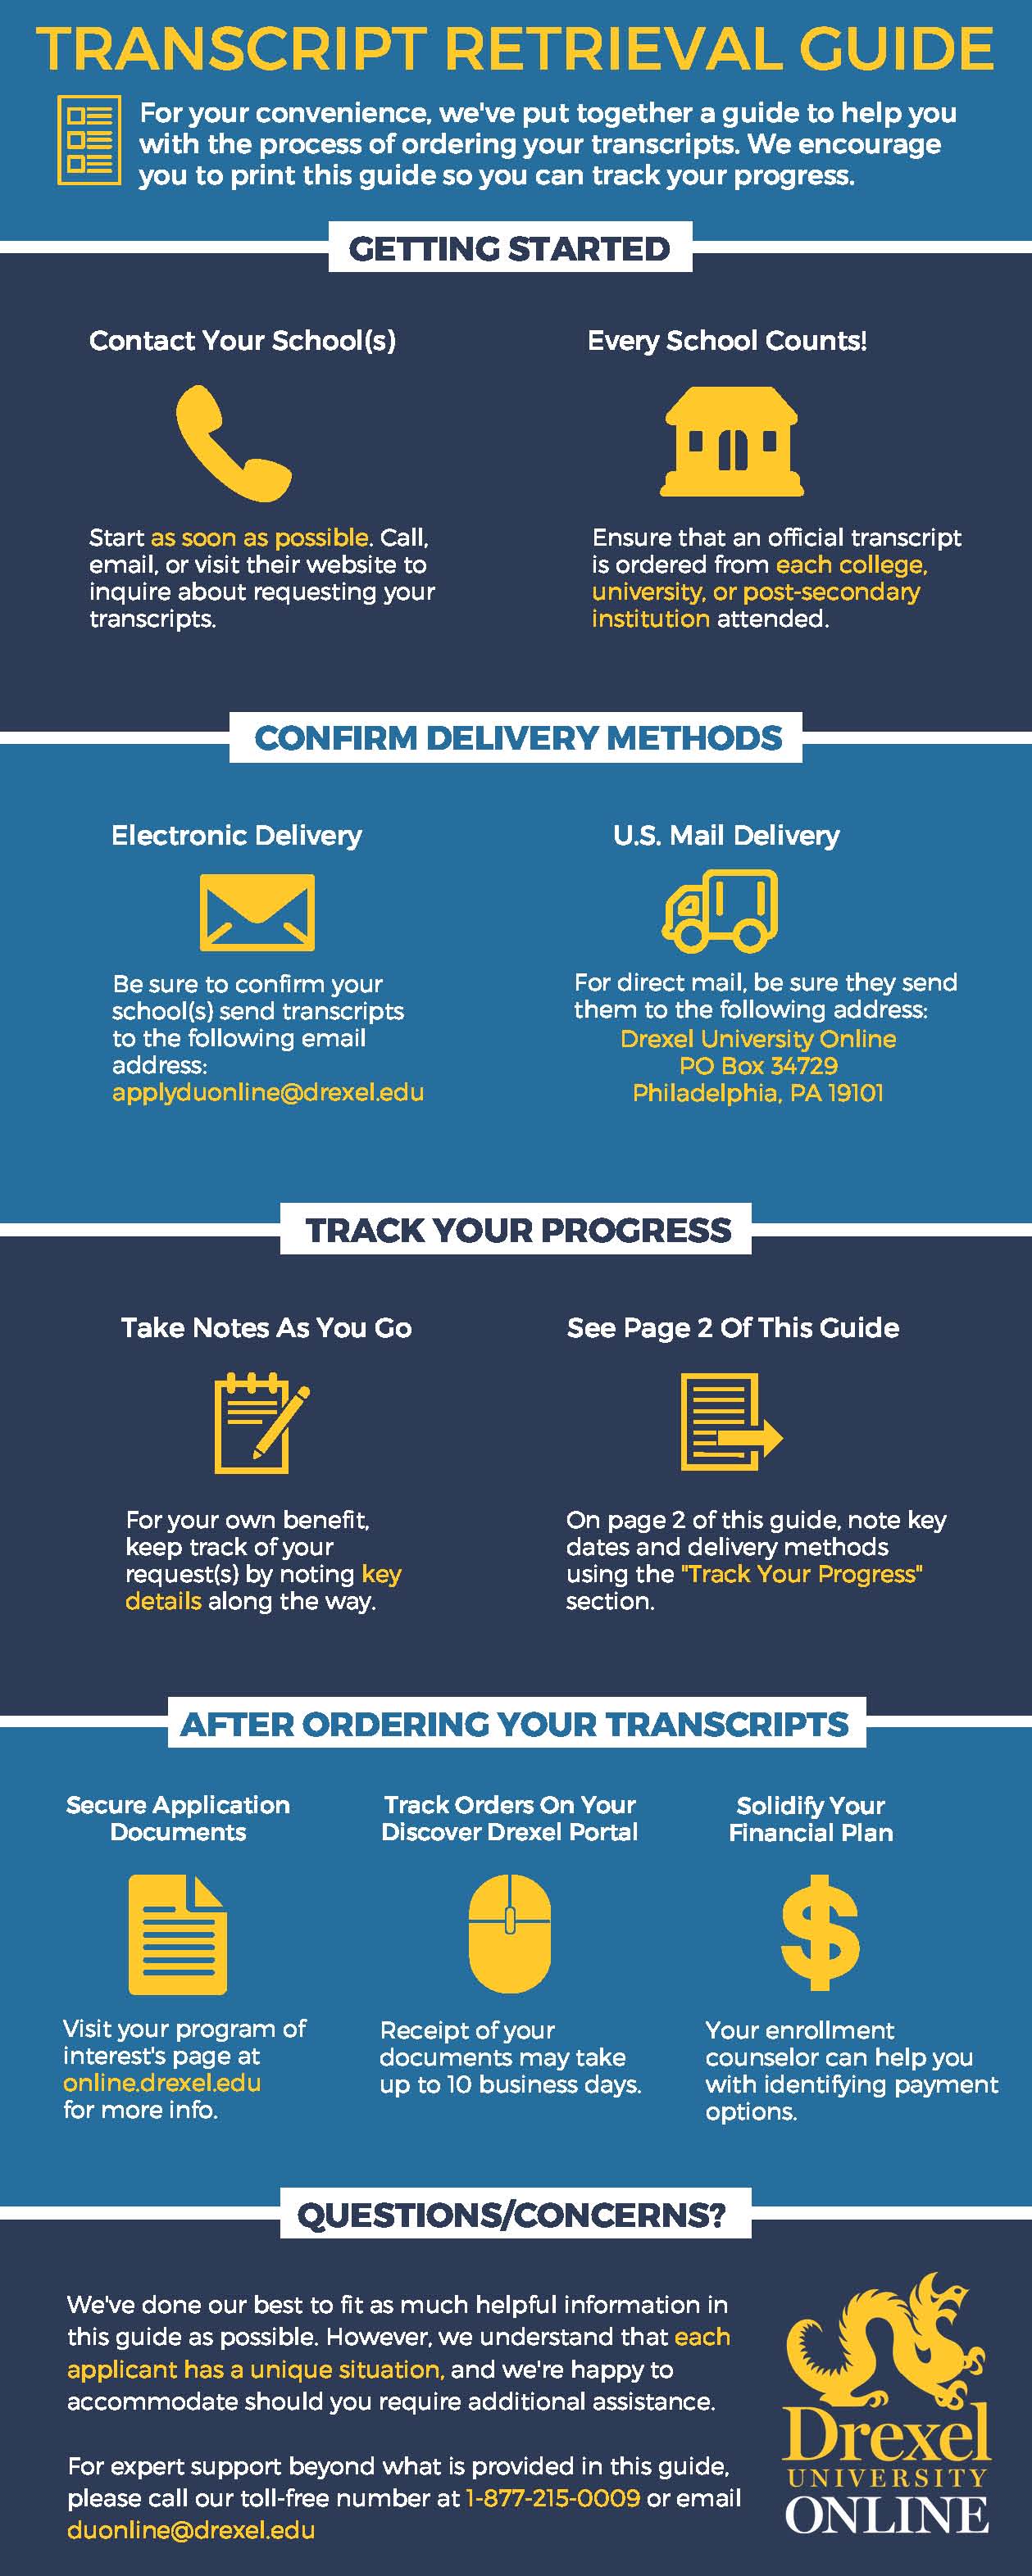 What are the typical steps for getting college transcripts online?